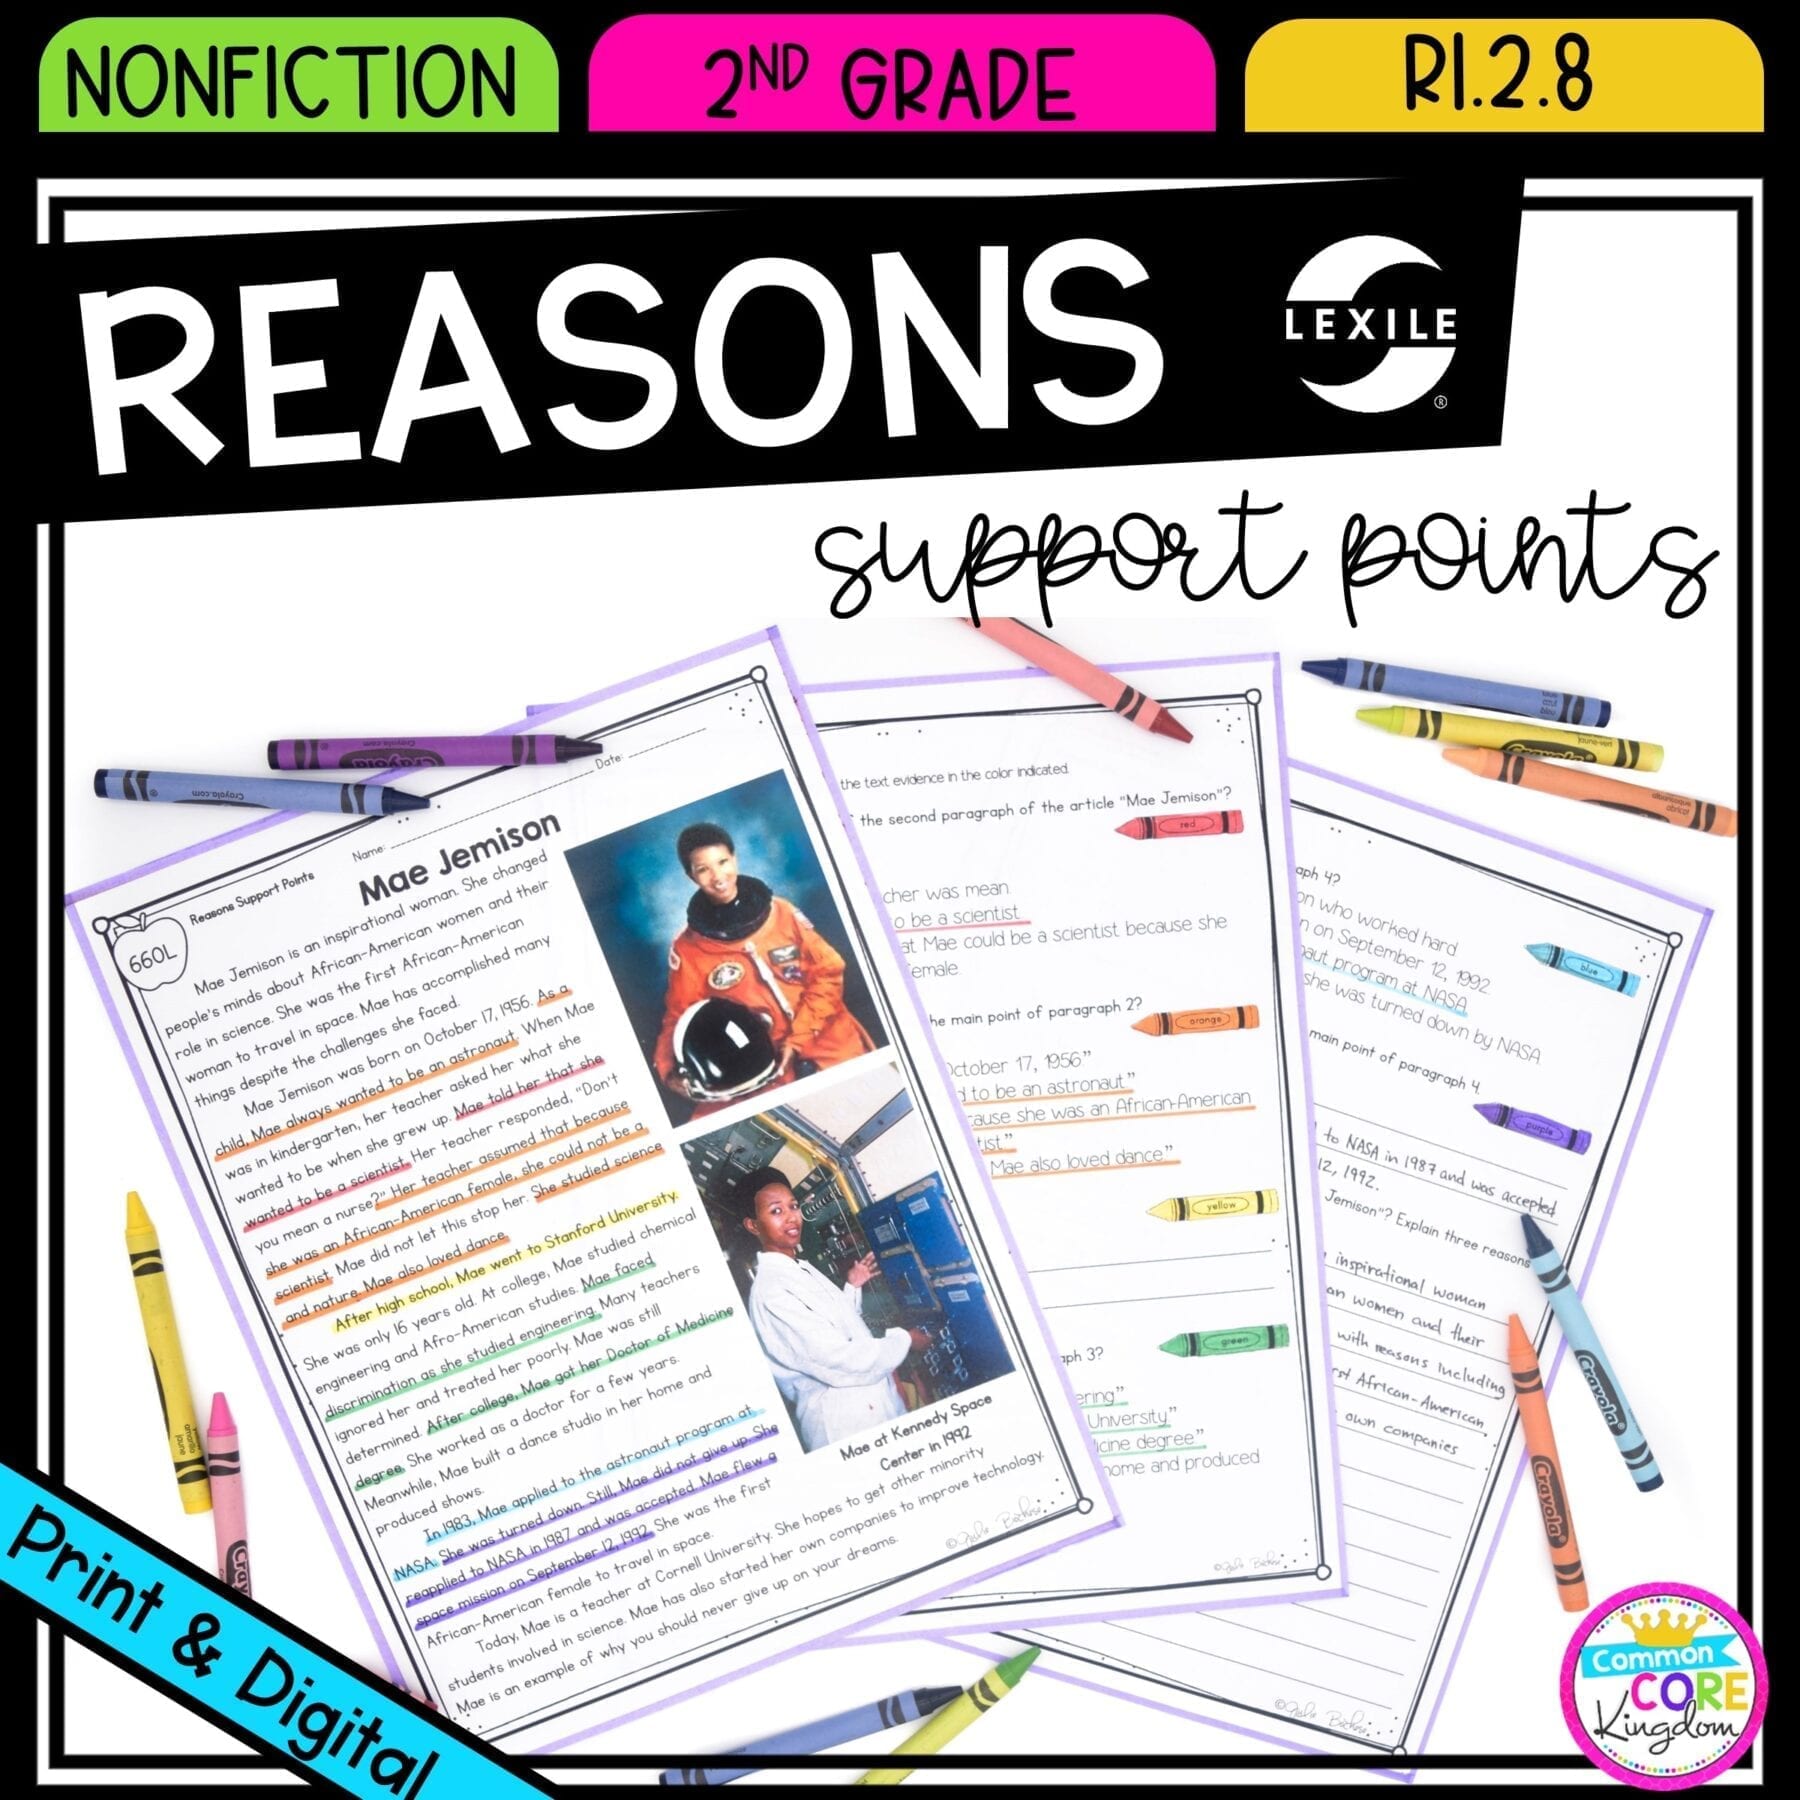 Author's Point and Supporting Reasons for 2nd grade cover showing printable and digital worksheets